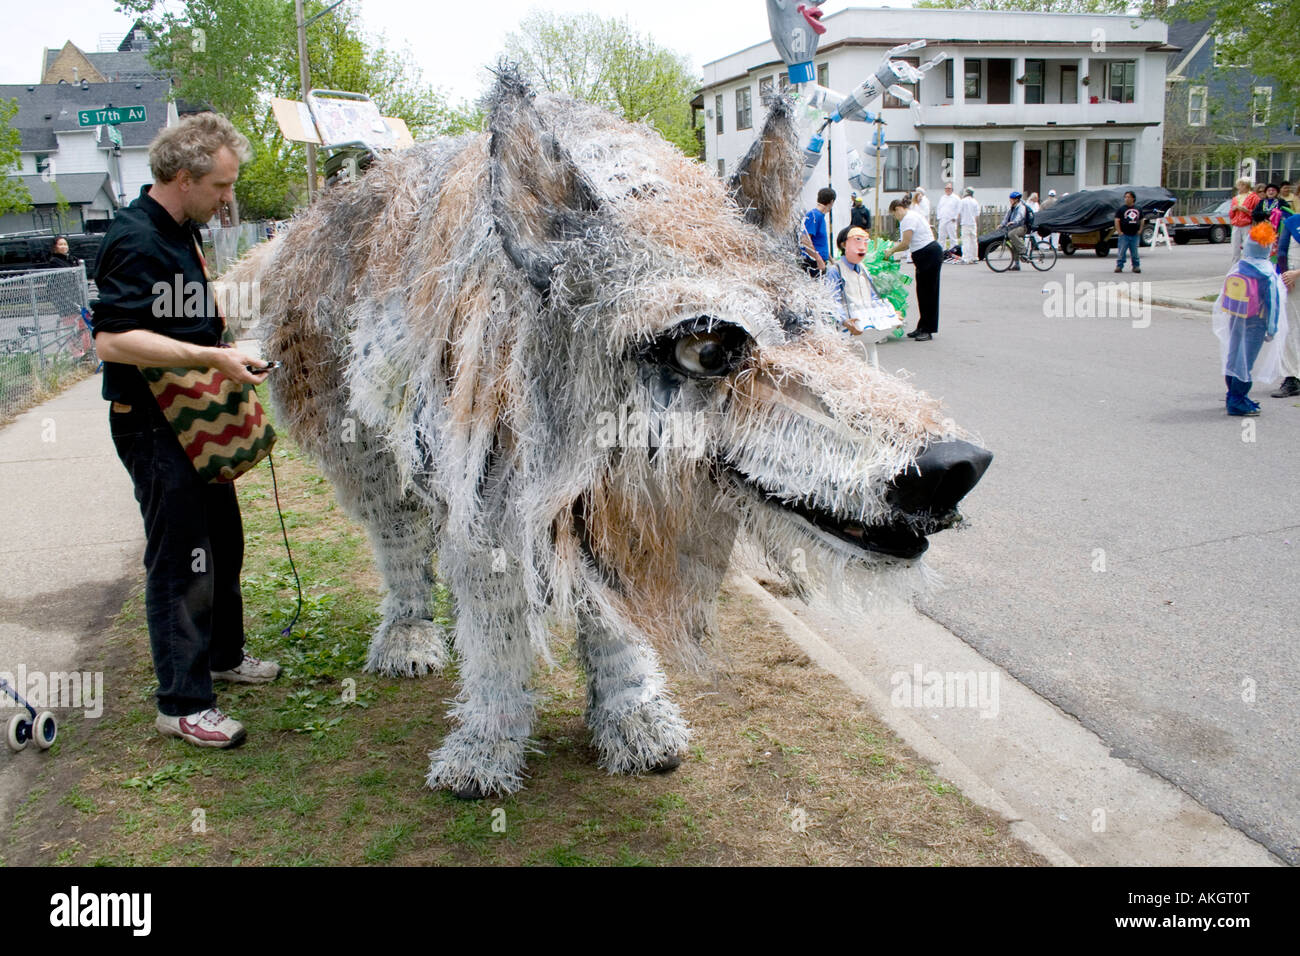 setting-up-communications-with-two-people-inside-wolf-costume-mayday-AKGT0T.jpg